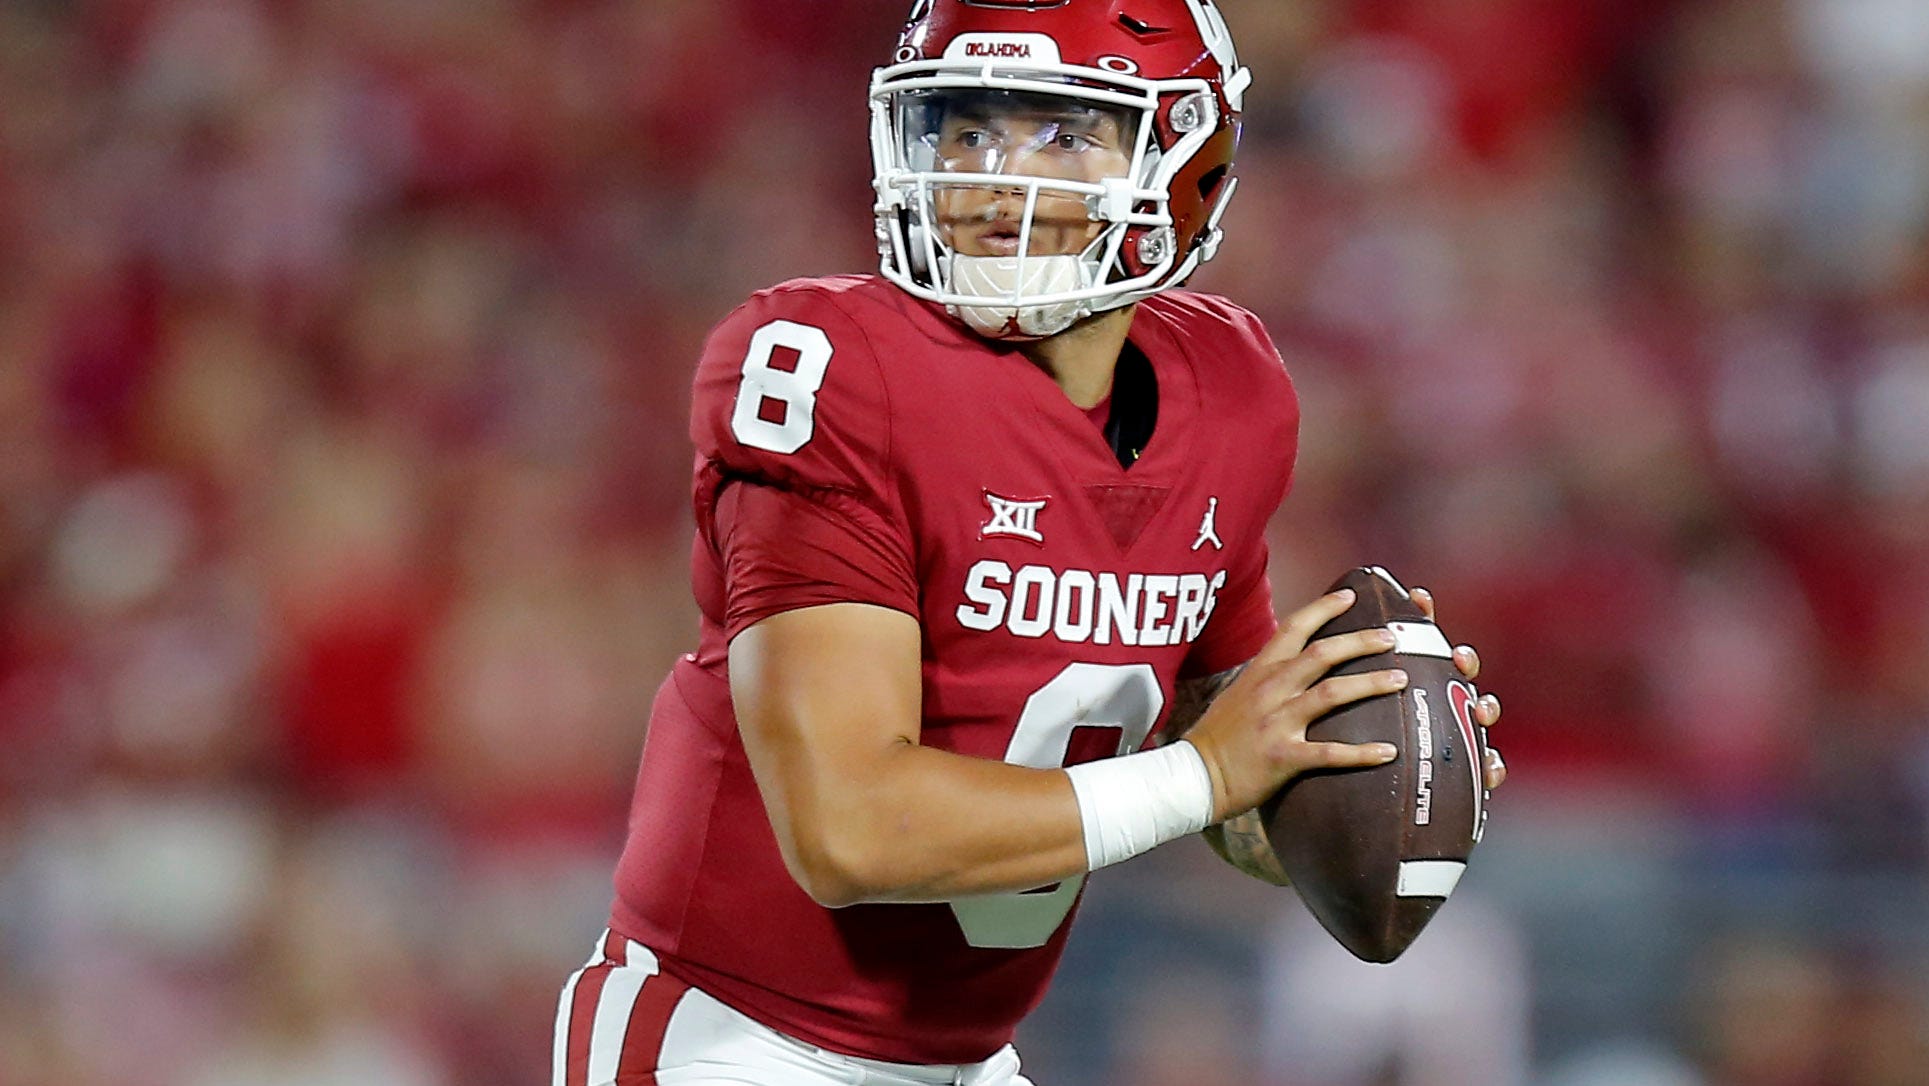 OU football Dillon Gabriel is efficiently leading Sooners' offense